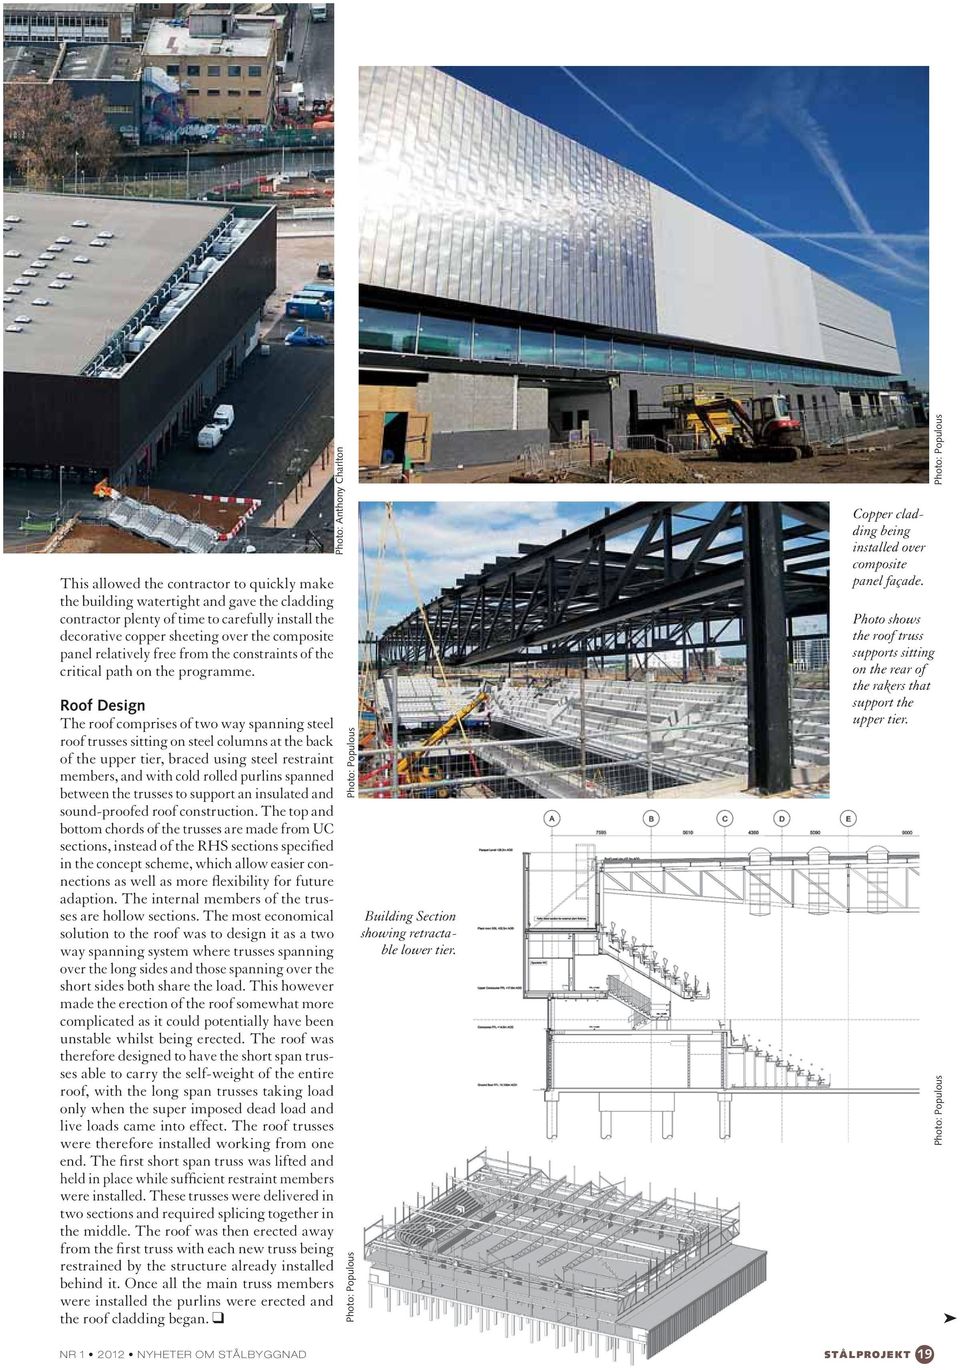 Roof Design The roof comprises of two way spanning steel roof trusses sitting on steel columns at the back of the upper tier, braced using steel restraint members, and with cold rolled purlins